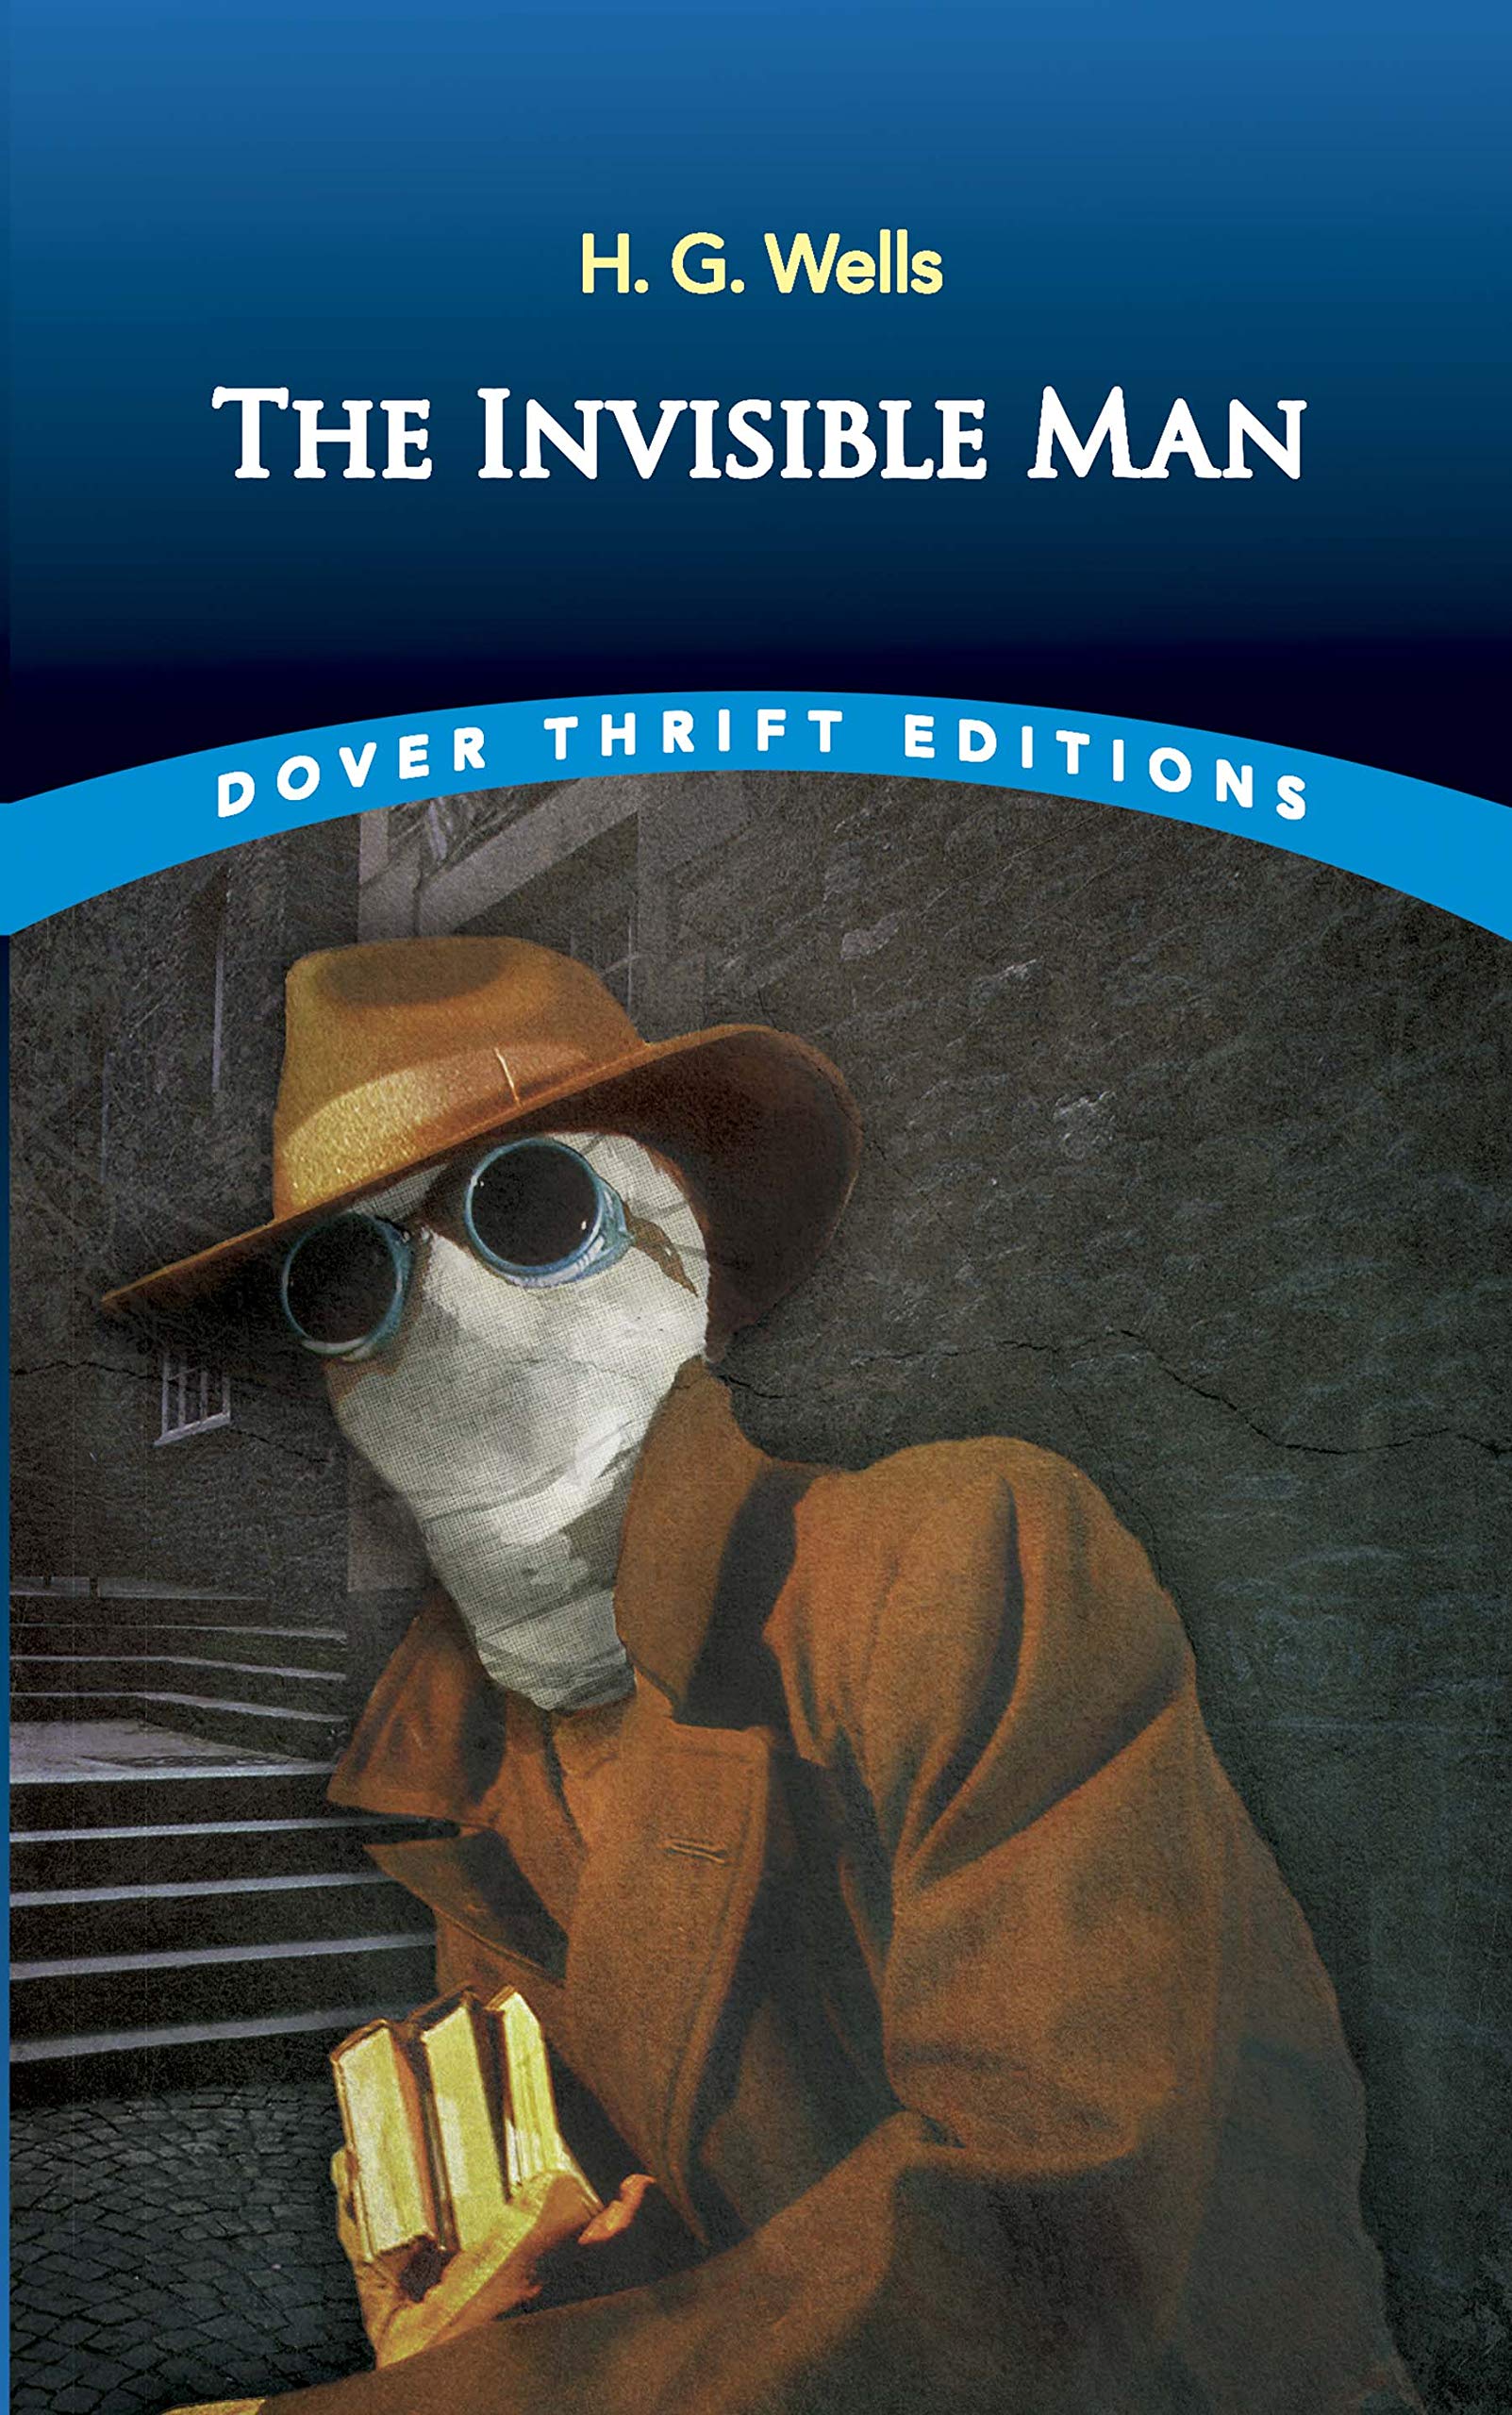 The Invisible Man 2020 dubbed